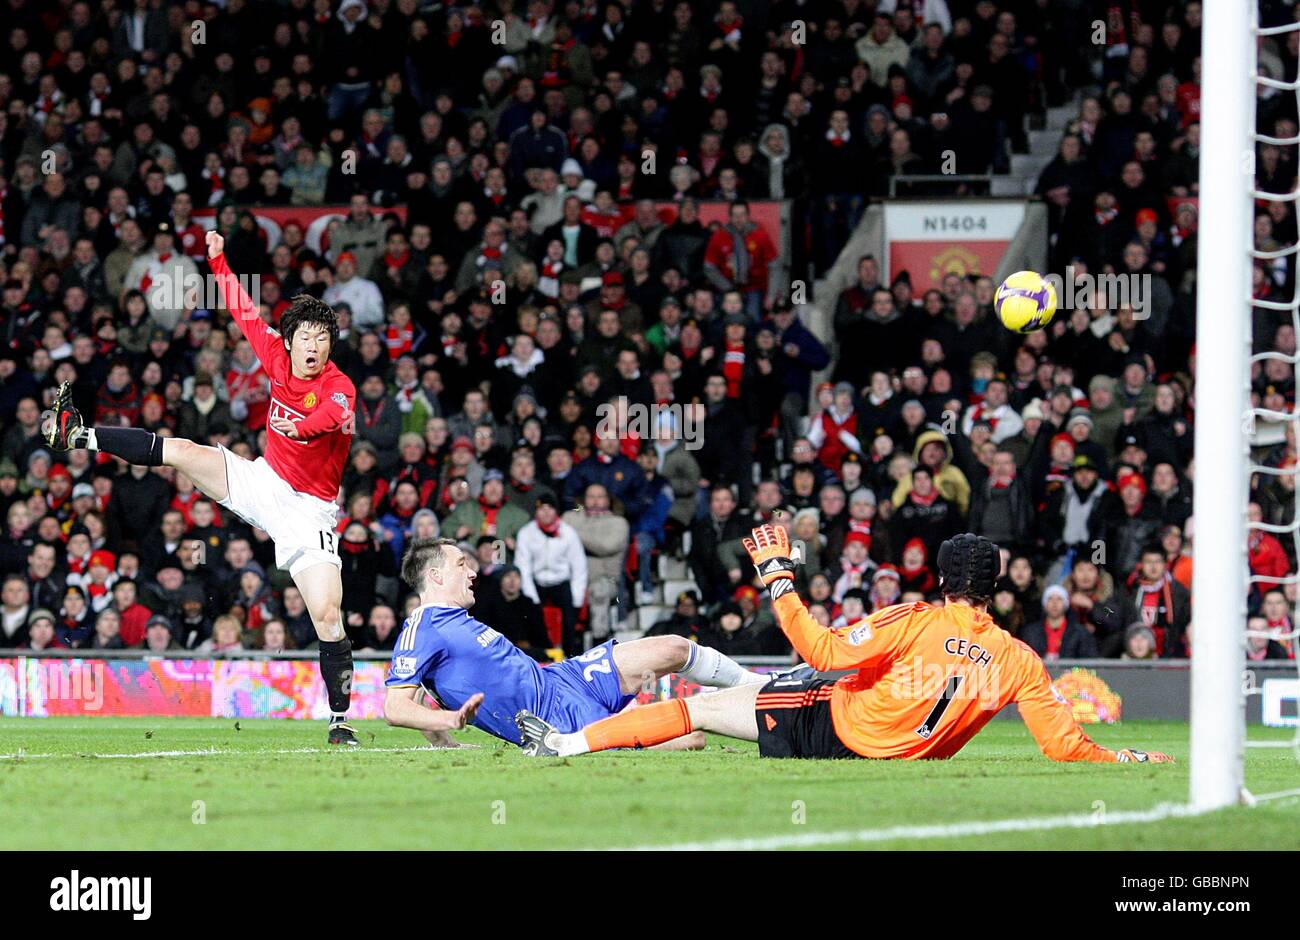 Manchester United's Ji-Sung Park (r) has a shot on goal Stock Photo